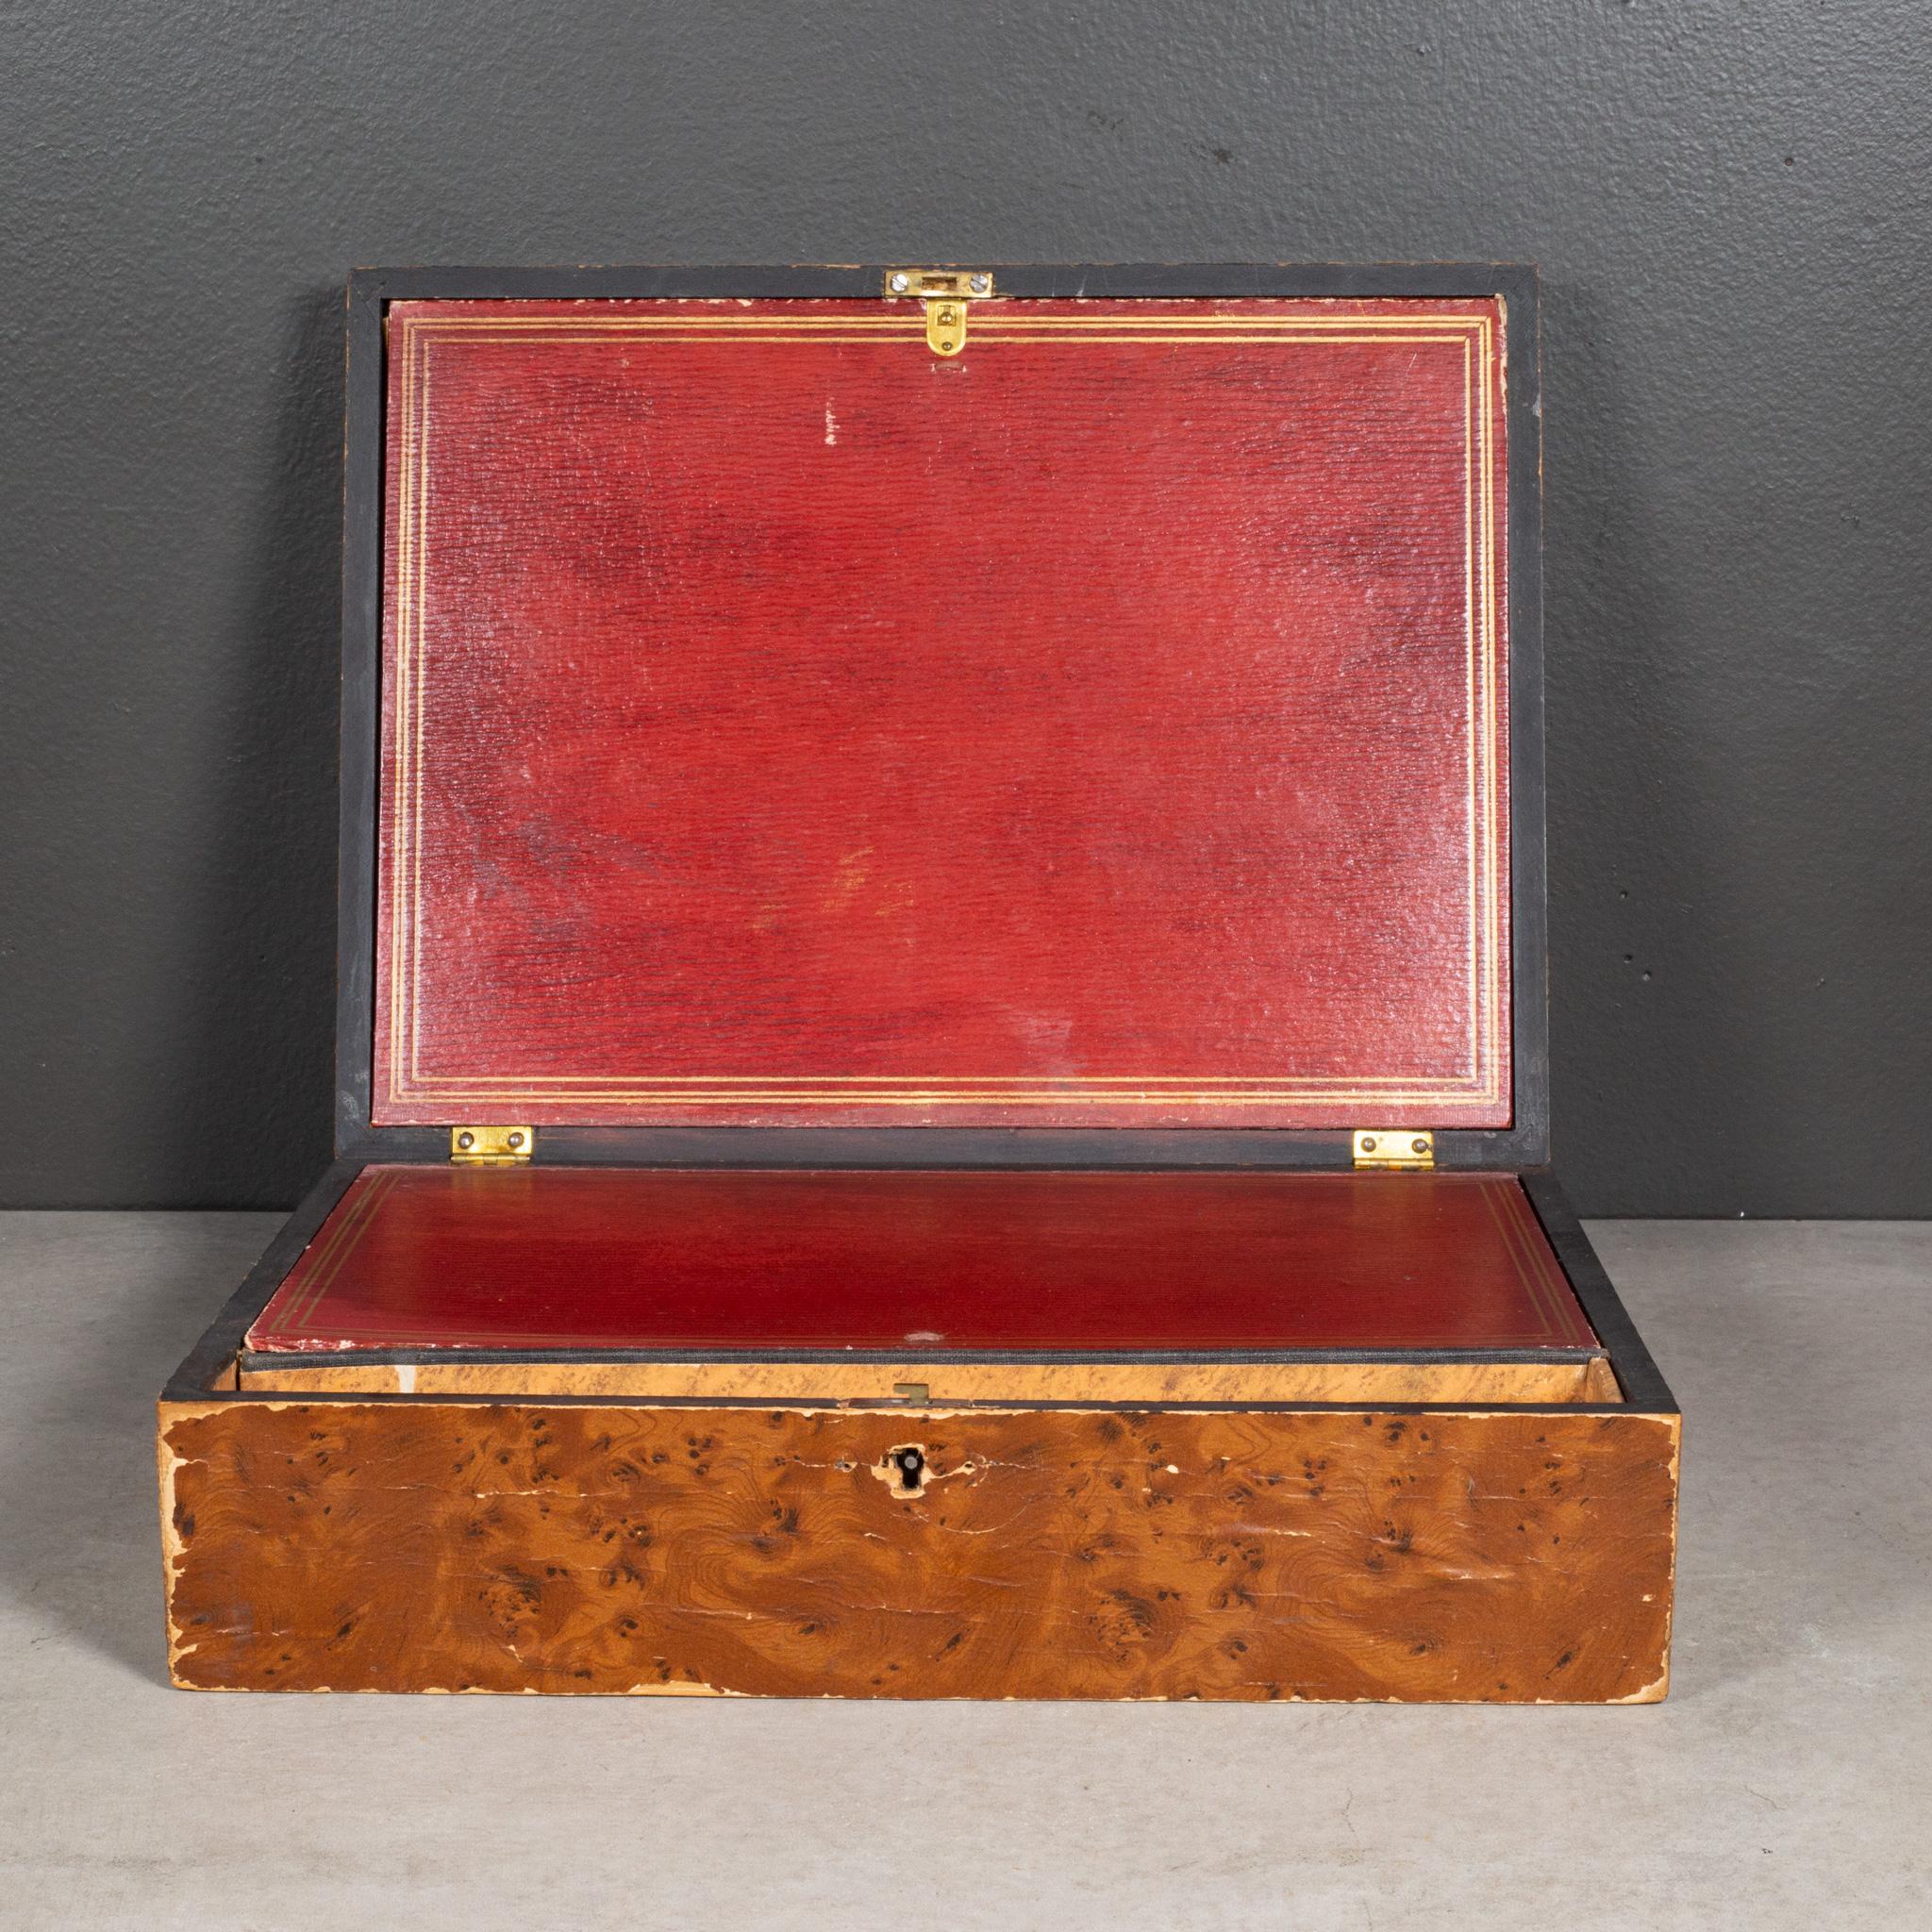 ABOUT

A 19th century pressed paper lap desk with an embossed and gilded stag decoration to top. Top and bottom open to reveal storage areas along with an area for writing instruments and creates a writing surface when closed. Several copies of rice